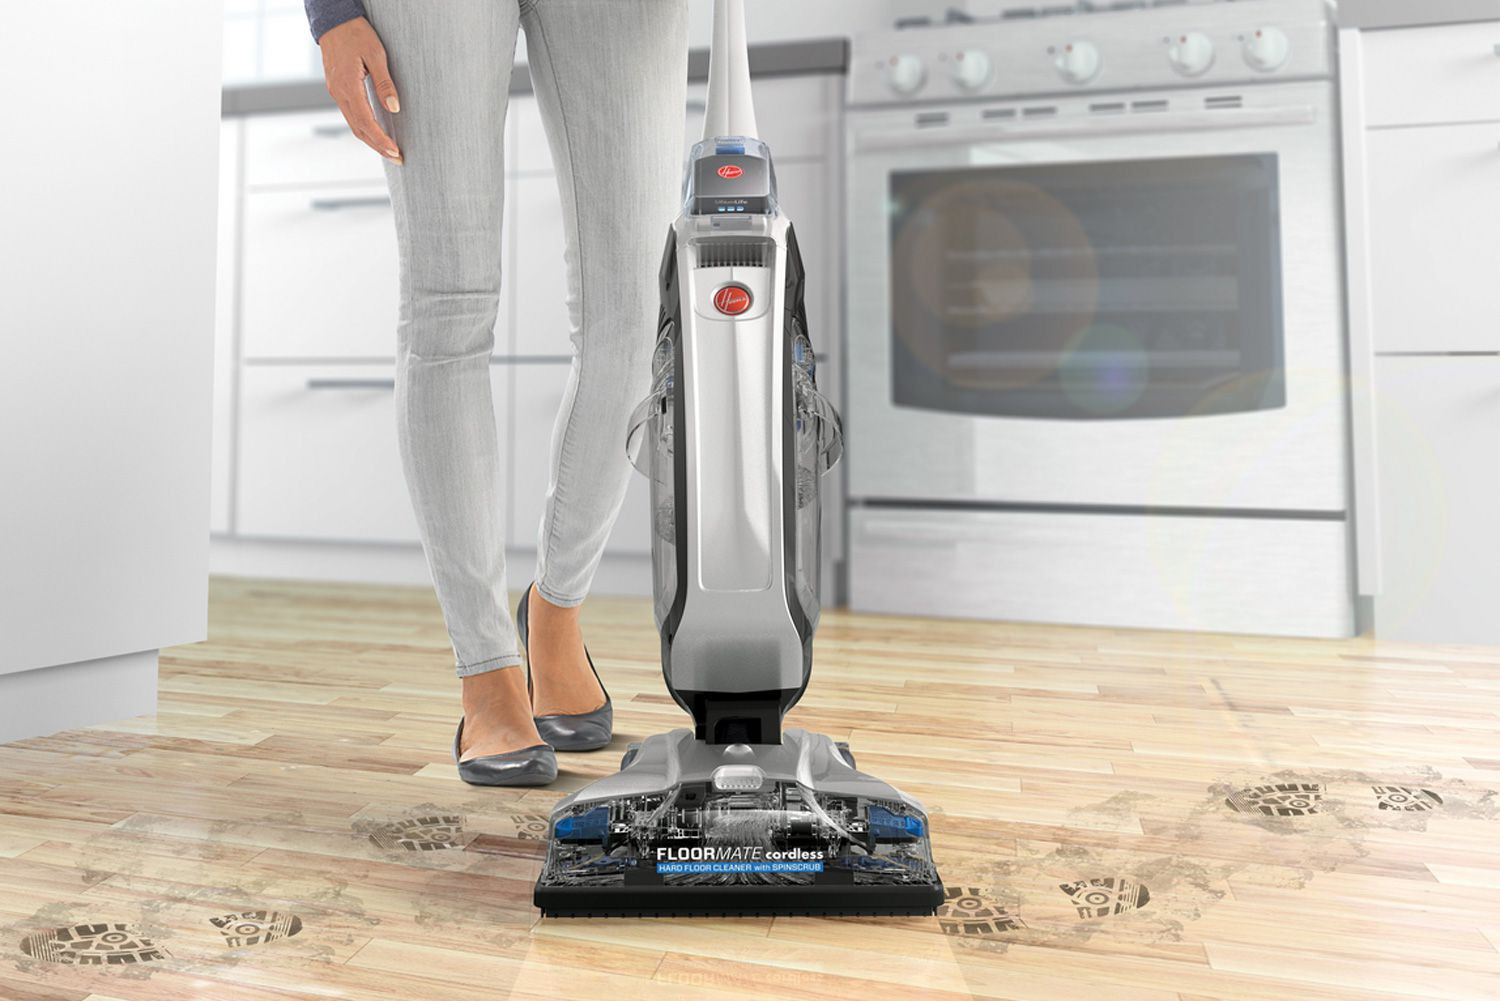 16 Recommended Best Vacuums for Hardwood Floors 2016 2024 free download best vacuums for hardwood floors 2016 of hoover floormate cleaner review pertaining to hoover floormate 59a452af685fbe00102f4ce0